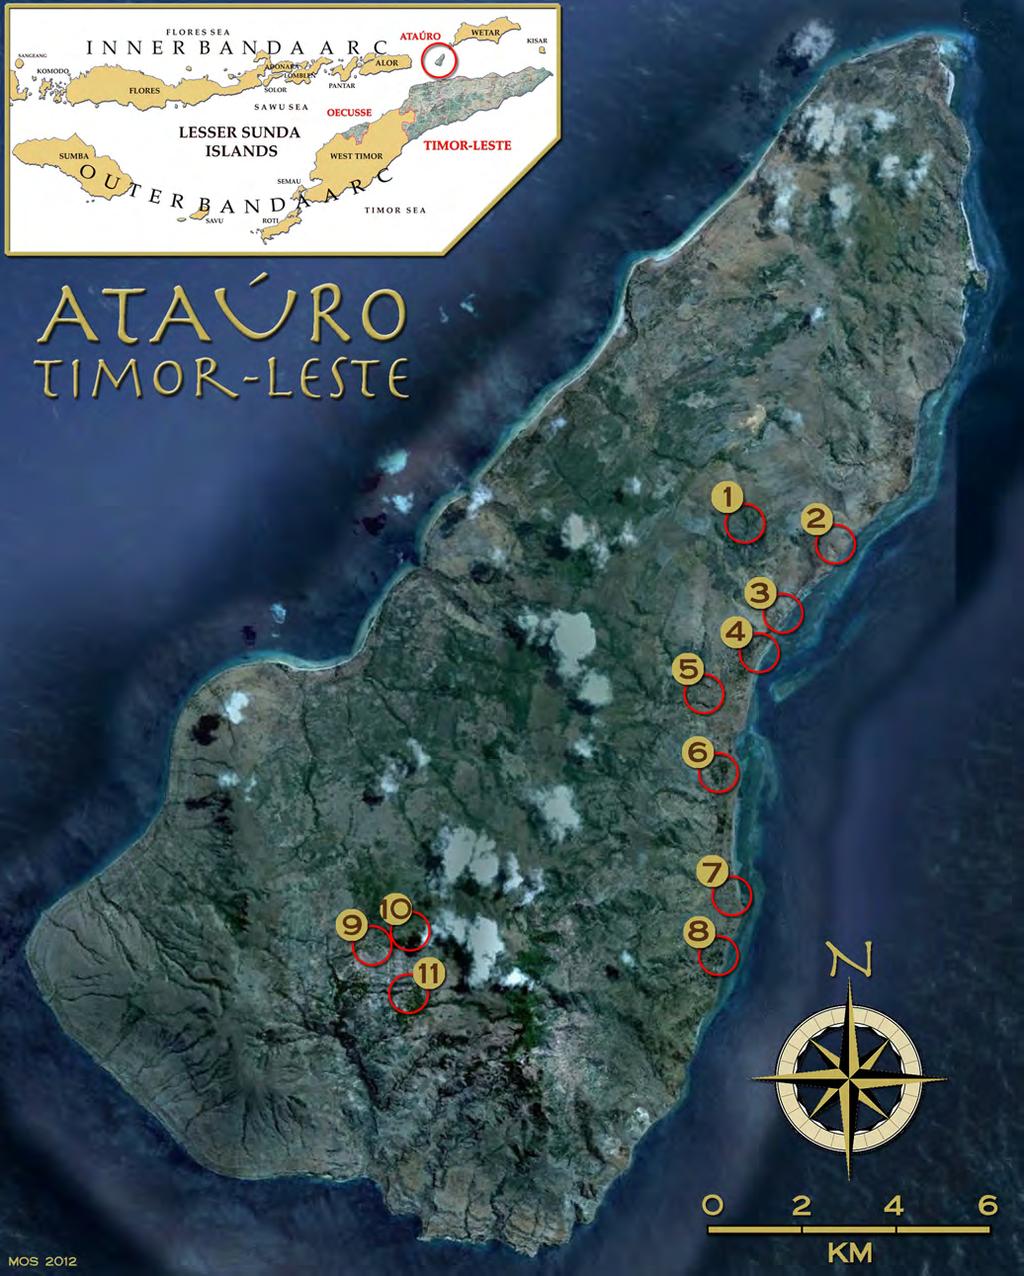 Kaiser et al. Herpetofauna of Ataúro Island, Timor-Leste Figure 1. Map of Ataúro Island, Timor-Leste. Collecting localities are identified by numbers corresponding to the descriptions in Table 1.